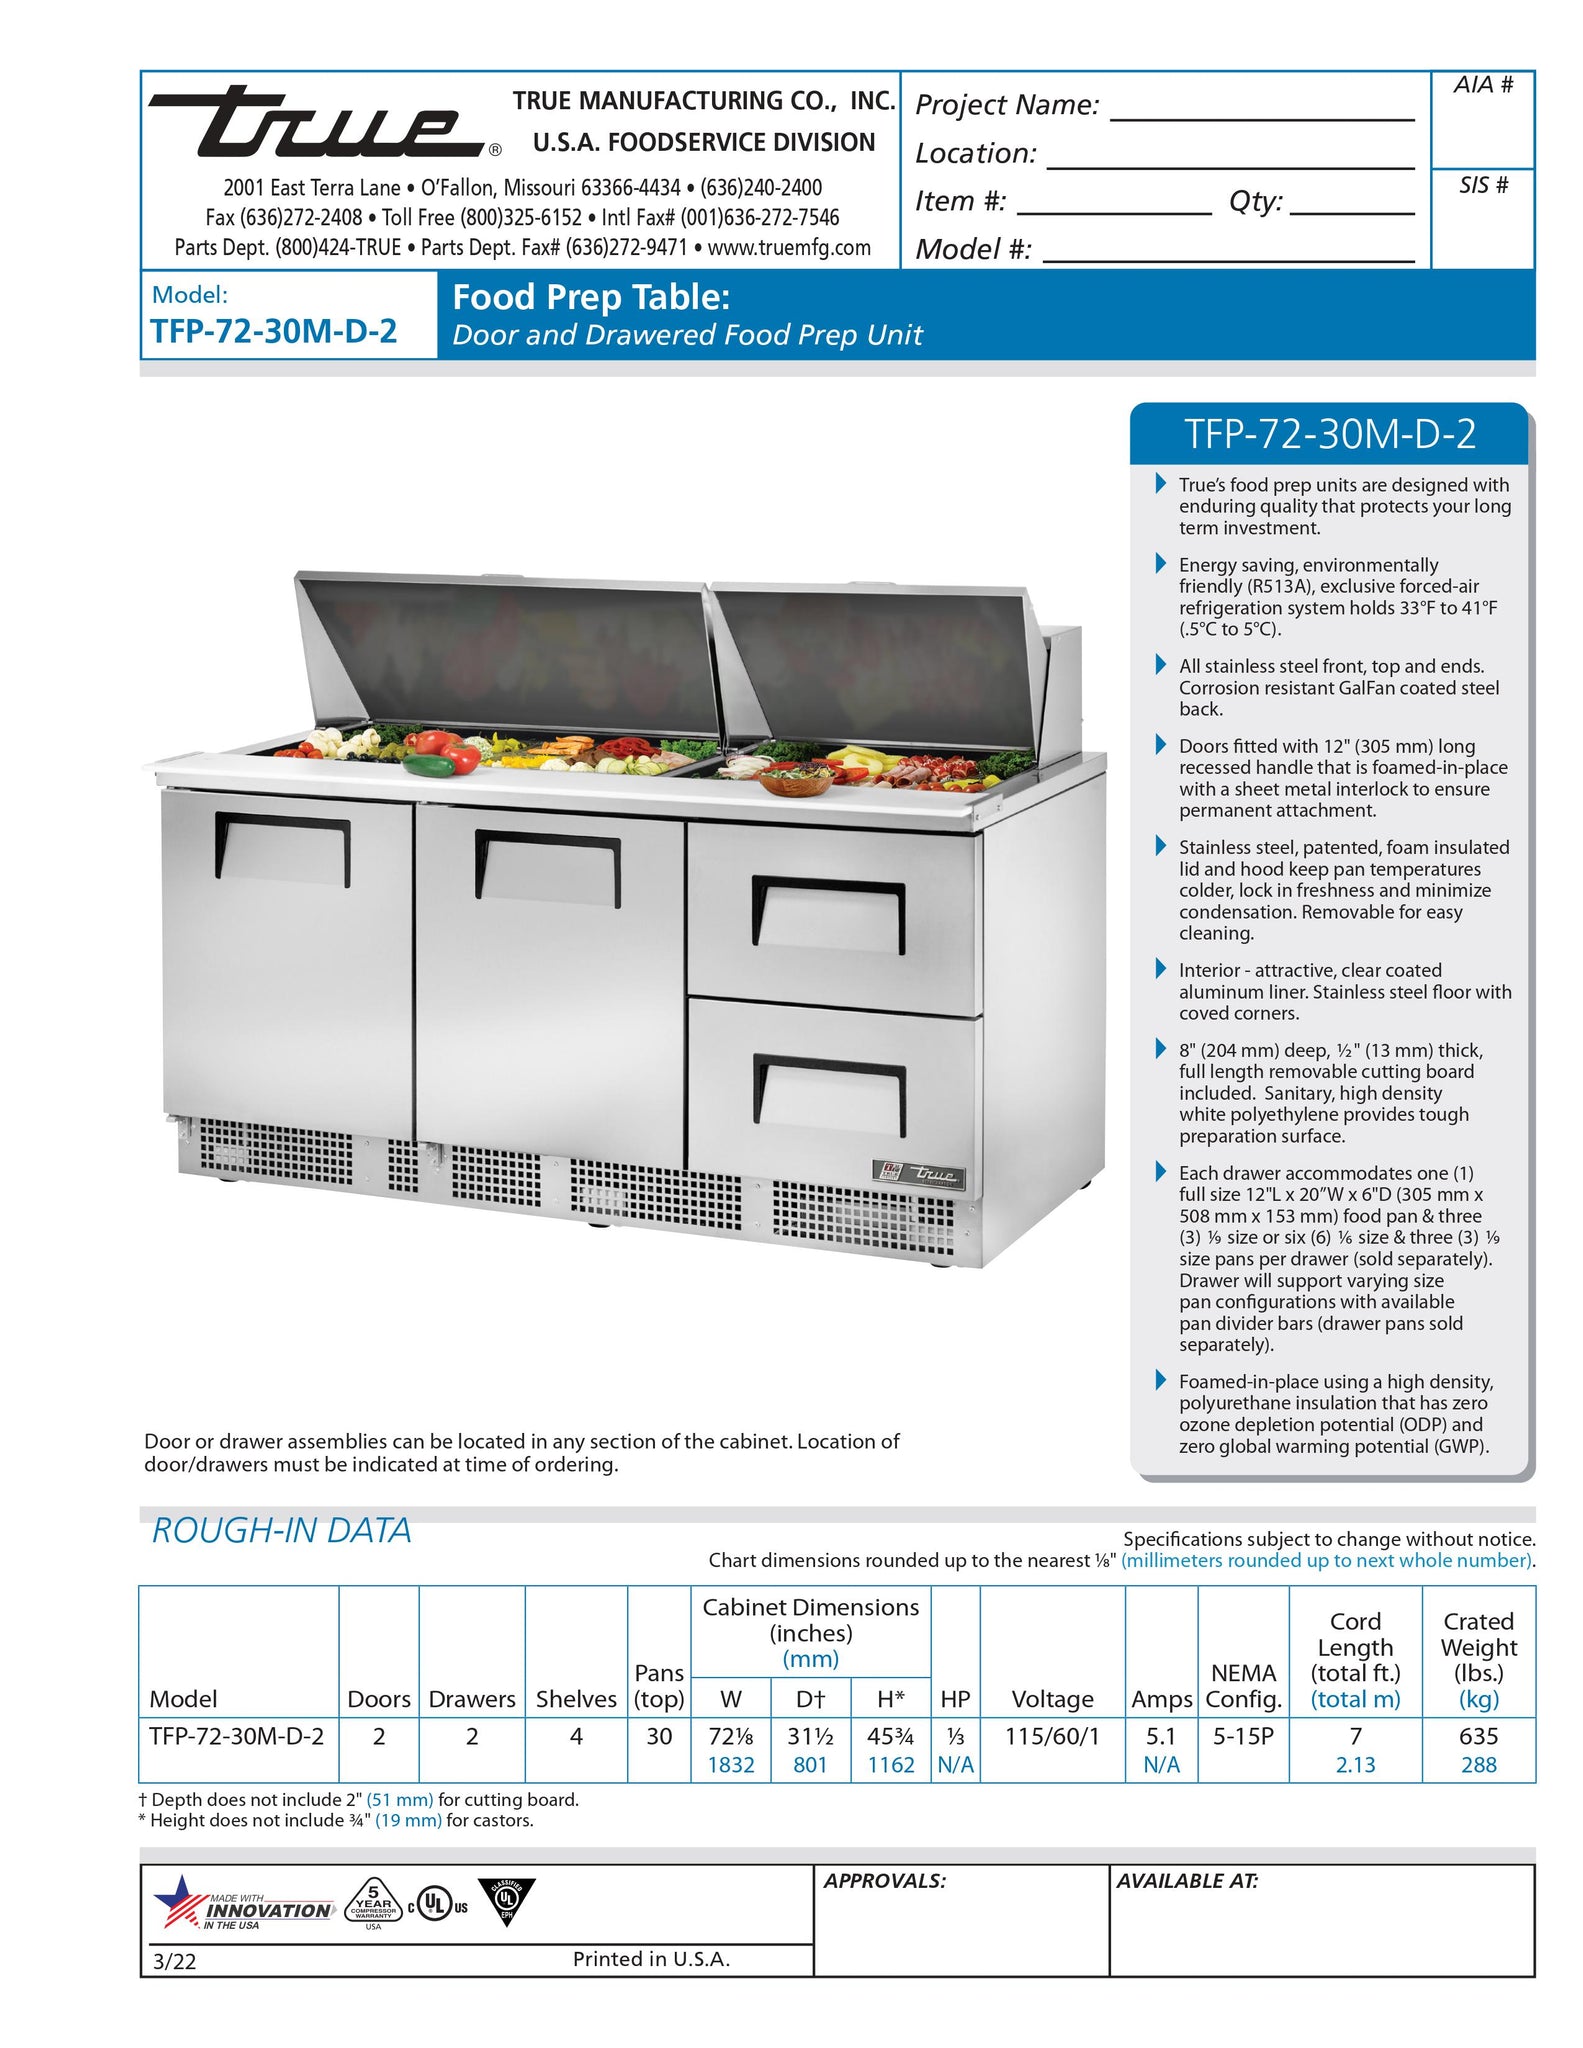 True TFP-72-30M-D-2 72" Refrigerated Sandwich / Salad Prep Table with 2 Right Drawers and 2 Doors